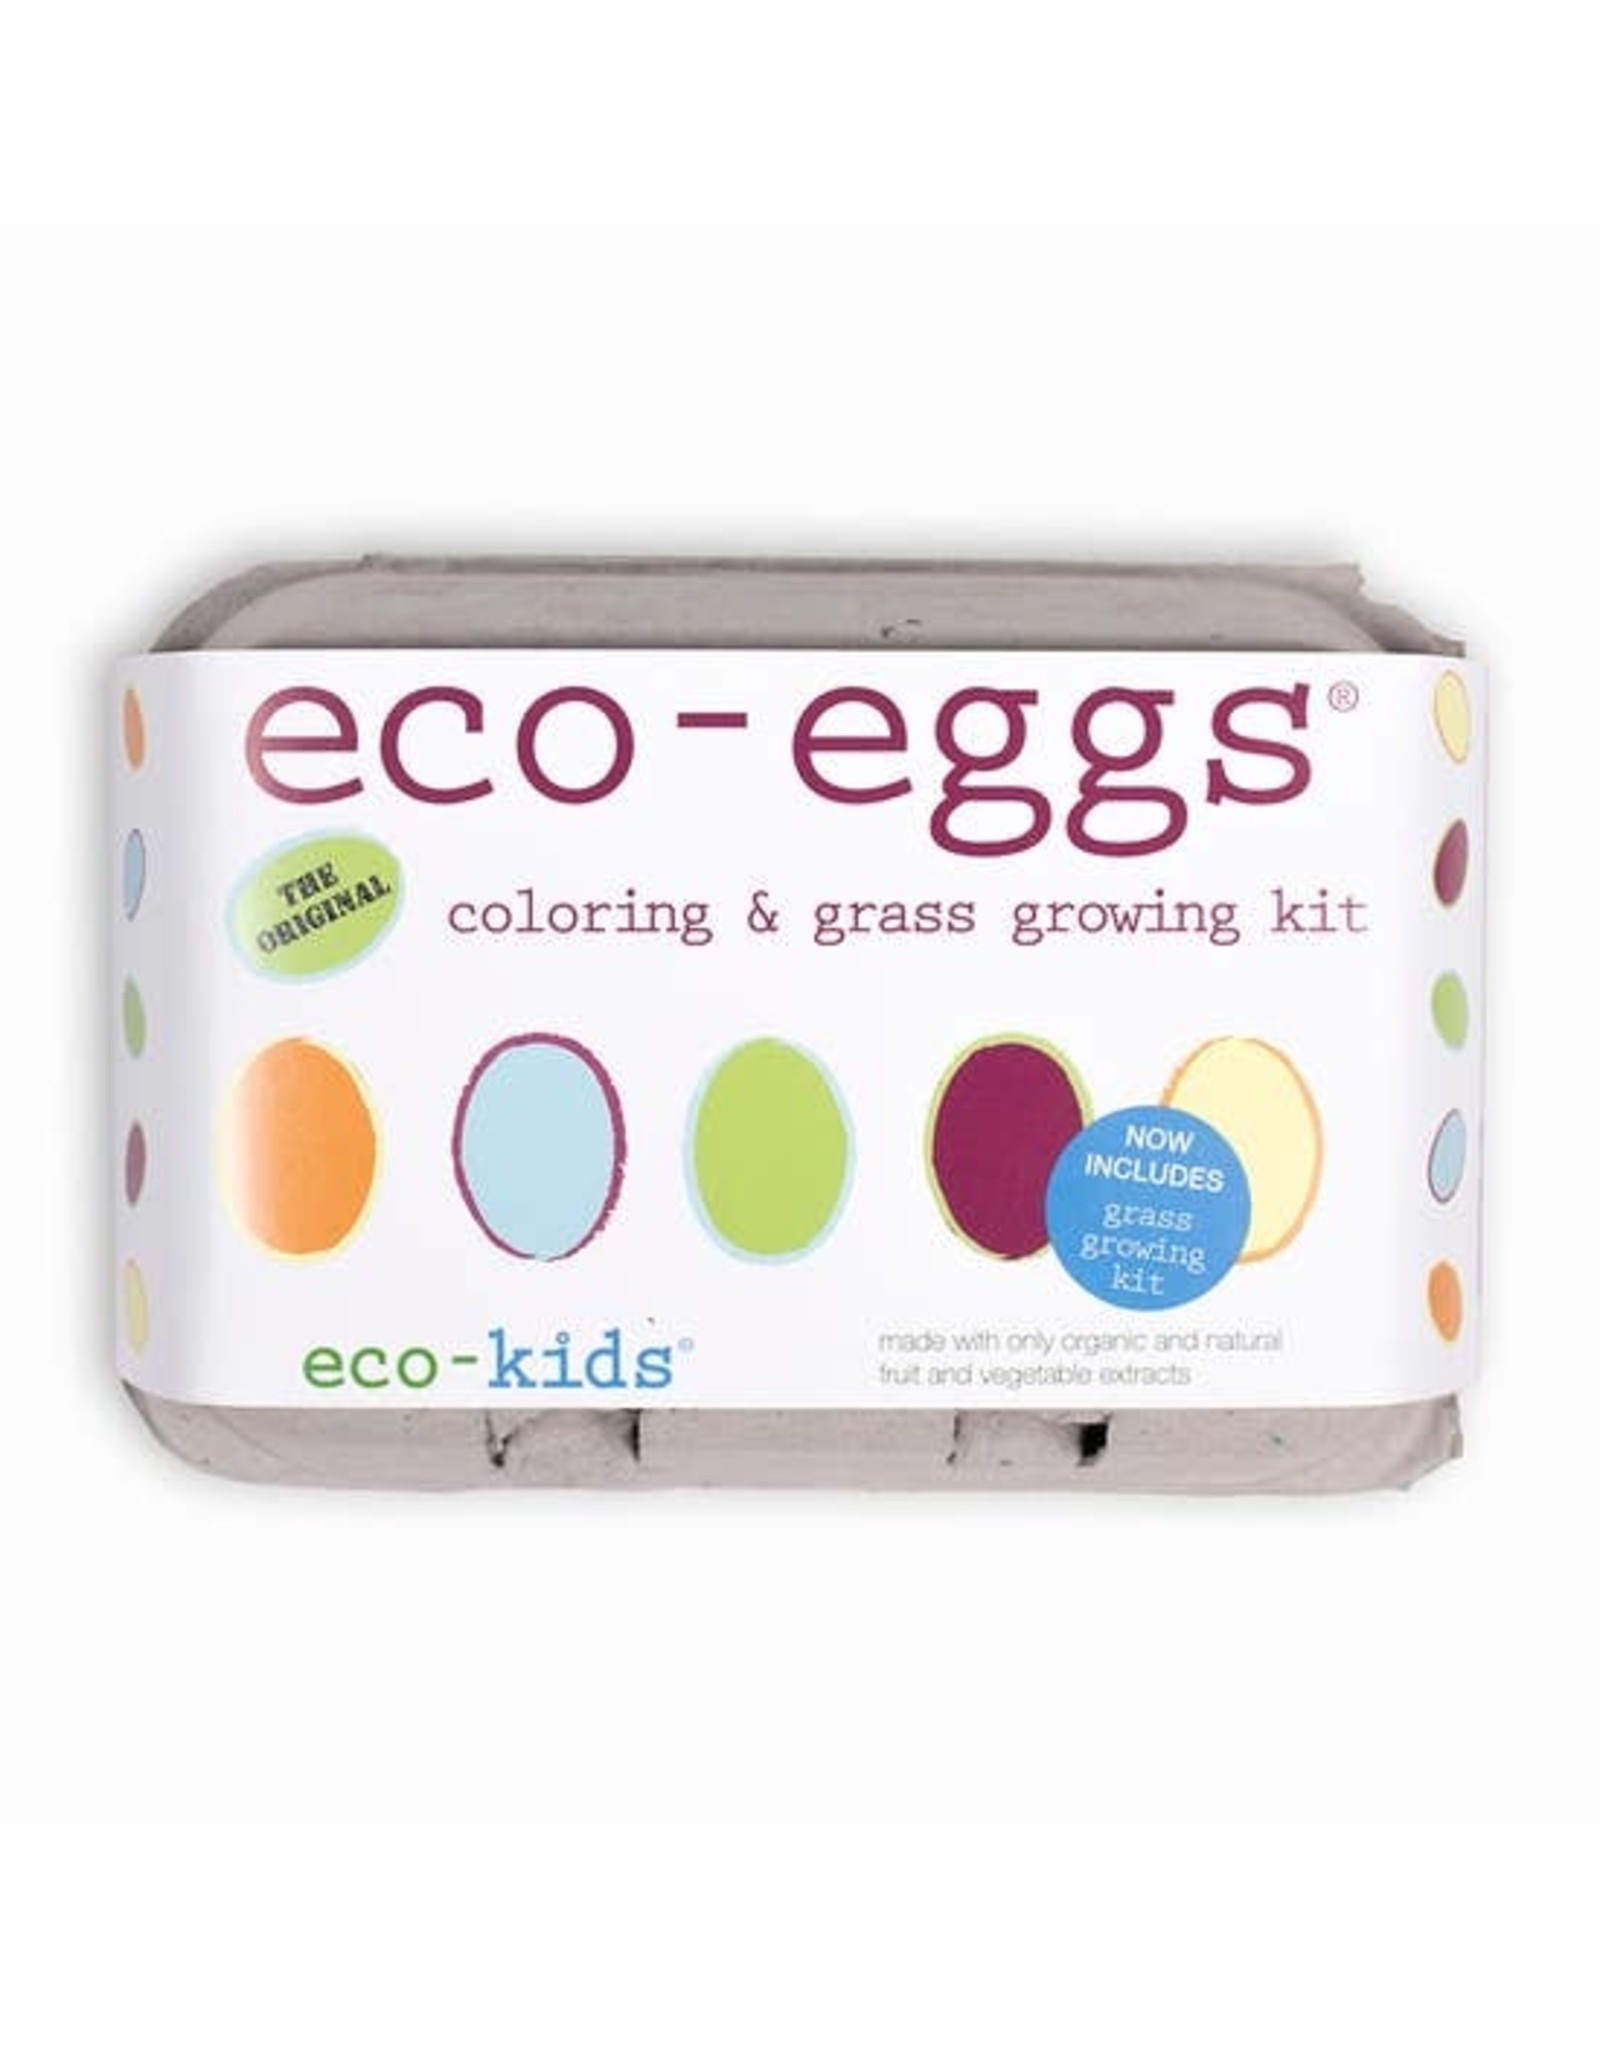 eco-kids eco-eggs coloring and grass kit